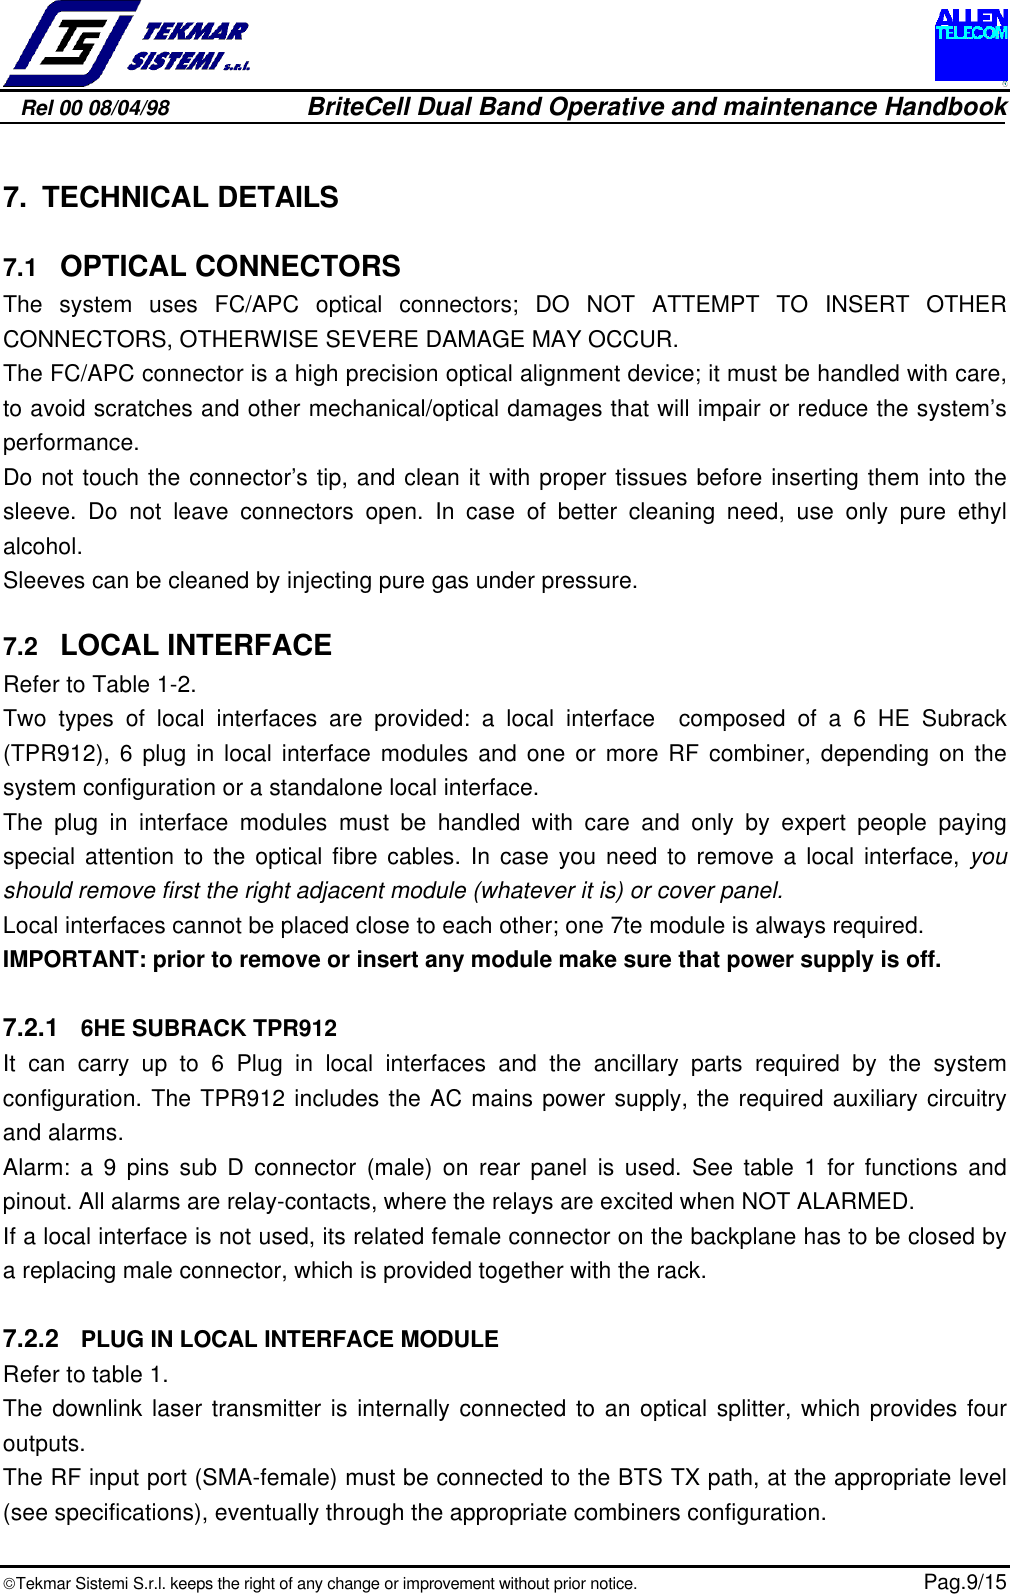 Rel 00 08/04/98                         BriteCell Dual Band Operative and maintenance HandbookTekmar Sistemi S.r.l. keeps the right of any change or improvement without prior notice.  Pag.9/157. TECHNICAL DETAILS7.1  OPTICAL CONNECTORSThe system uses FC/APC optical connectors; DO NOT ATTEMPT TO INSERT OTHERCONNECTORS, OTHERWISE SEVERE DAMAGE MAY OCCUR.The FC/APC connector is a high precision optical alignment device; it must be handled with care,to avoid scratches and other mechanical/optical damages that will impair or reduce the system’sperformance.Do not touch the connector’s tip, and clean it with proper tissues before inserting them into thesleeve. Do not leave connectors open. In case of better cleaning need, use only pure ethylalcohol.Sleeves can be cleaned by injecting pure gas under pressure.7.2  LOCAL INTERFACERefer to Table 1-2.Two types of local interfaces are provided: a local interface  composed of a 6 HE Subrack(TPR912), 6 plug in local interface modules and one or more RF combiner, depending on thesystem configuration or a standalone local interface.The plug in interface modules must be handled with care and only by expert people payingspecial attention to the optical fibre cables. In case you need to remove a local interface, youshould remove first the right adjacent module (whatever it is) or cover panel.Local interfaces cannot be placed close to each other; one 7te module is always required.IMPORTANT: prior to remove or insert any module make sure that power supply is off.7.2.1  6HE SUBRACK TPR912It can carry up to 6 Plug in local interfaces and the ancillary parts required by the systemconfiguration. The TPR912 includes the AC mains power supply, the required auxiliary circuitryand alarms.Alarm: a 9 pins sub D connector (male) on rear panel is used. See table 1 for functions andpinout. All alarms are relay-contacts, where the relays are excited when NOT ALARMED.If a local interface is not used, its related female connector on the backplane has to be closed bya replacing male connector, which is provided together with the rack.7.2.2  PLUG IN LOCAL INTERFACE MODULERefer to table 1.The downlink laser transmitter is internally connected to an optical splitter, which provides fouroutputs.The RF input port (SMA-female) must be connected to the BTS TX path, at the appropriate level(see specifications), eventually through the appropriate combiners configuration.